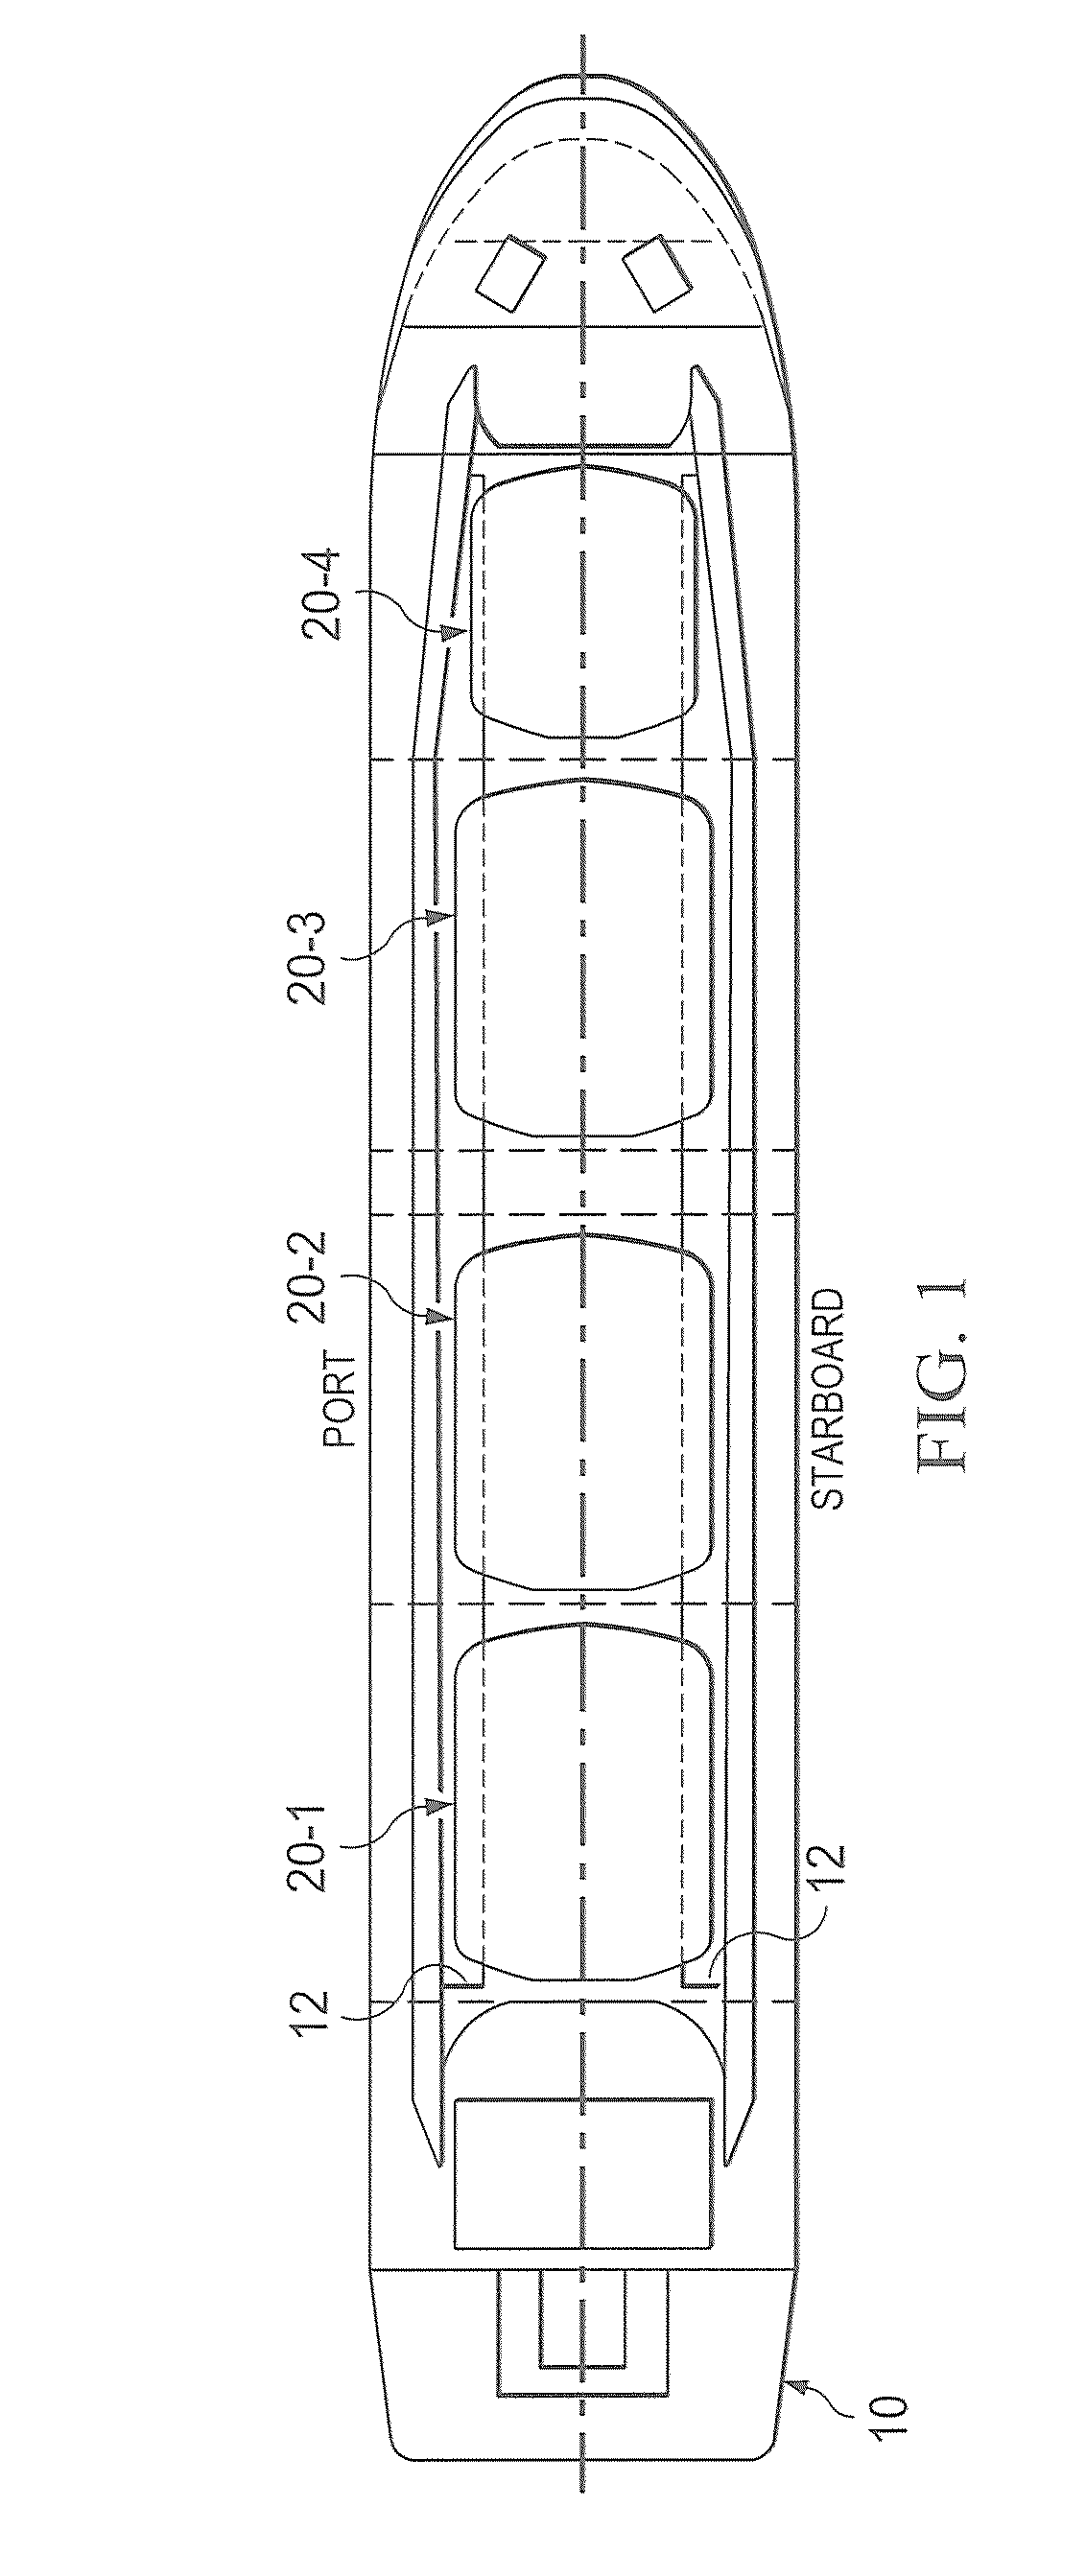 Systems and methods for supporting tanks in a cargo ship